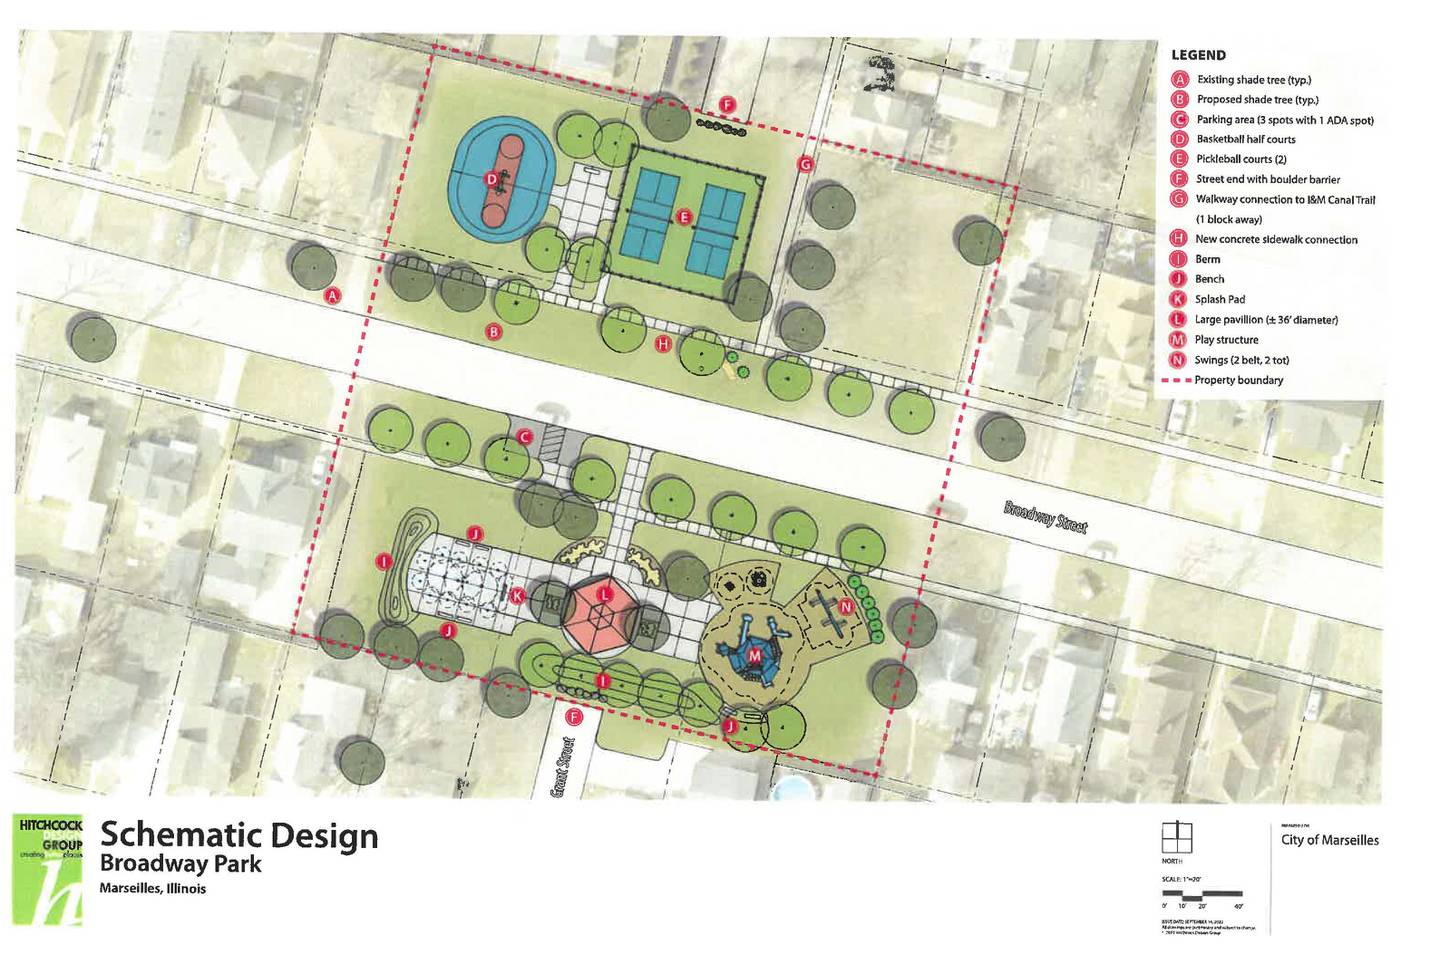 The city of Marseilles is hosting a public meeting 6 p.m. Wednesday, Sept. 21, at Marseilles City Hall, 209 Lincoln St., to inform the public about its submission of an Open Space Land Acquisition and Development grant application for the renovation of Broadway Park.